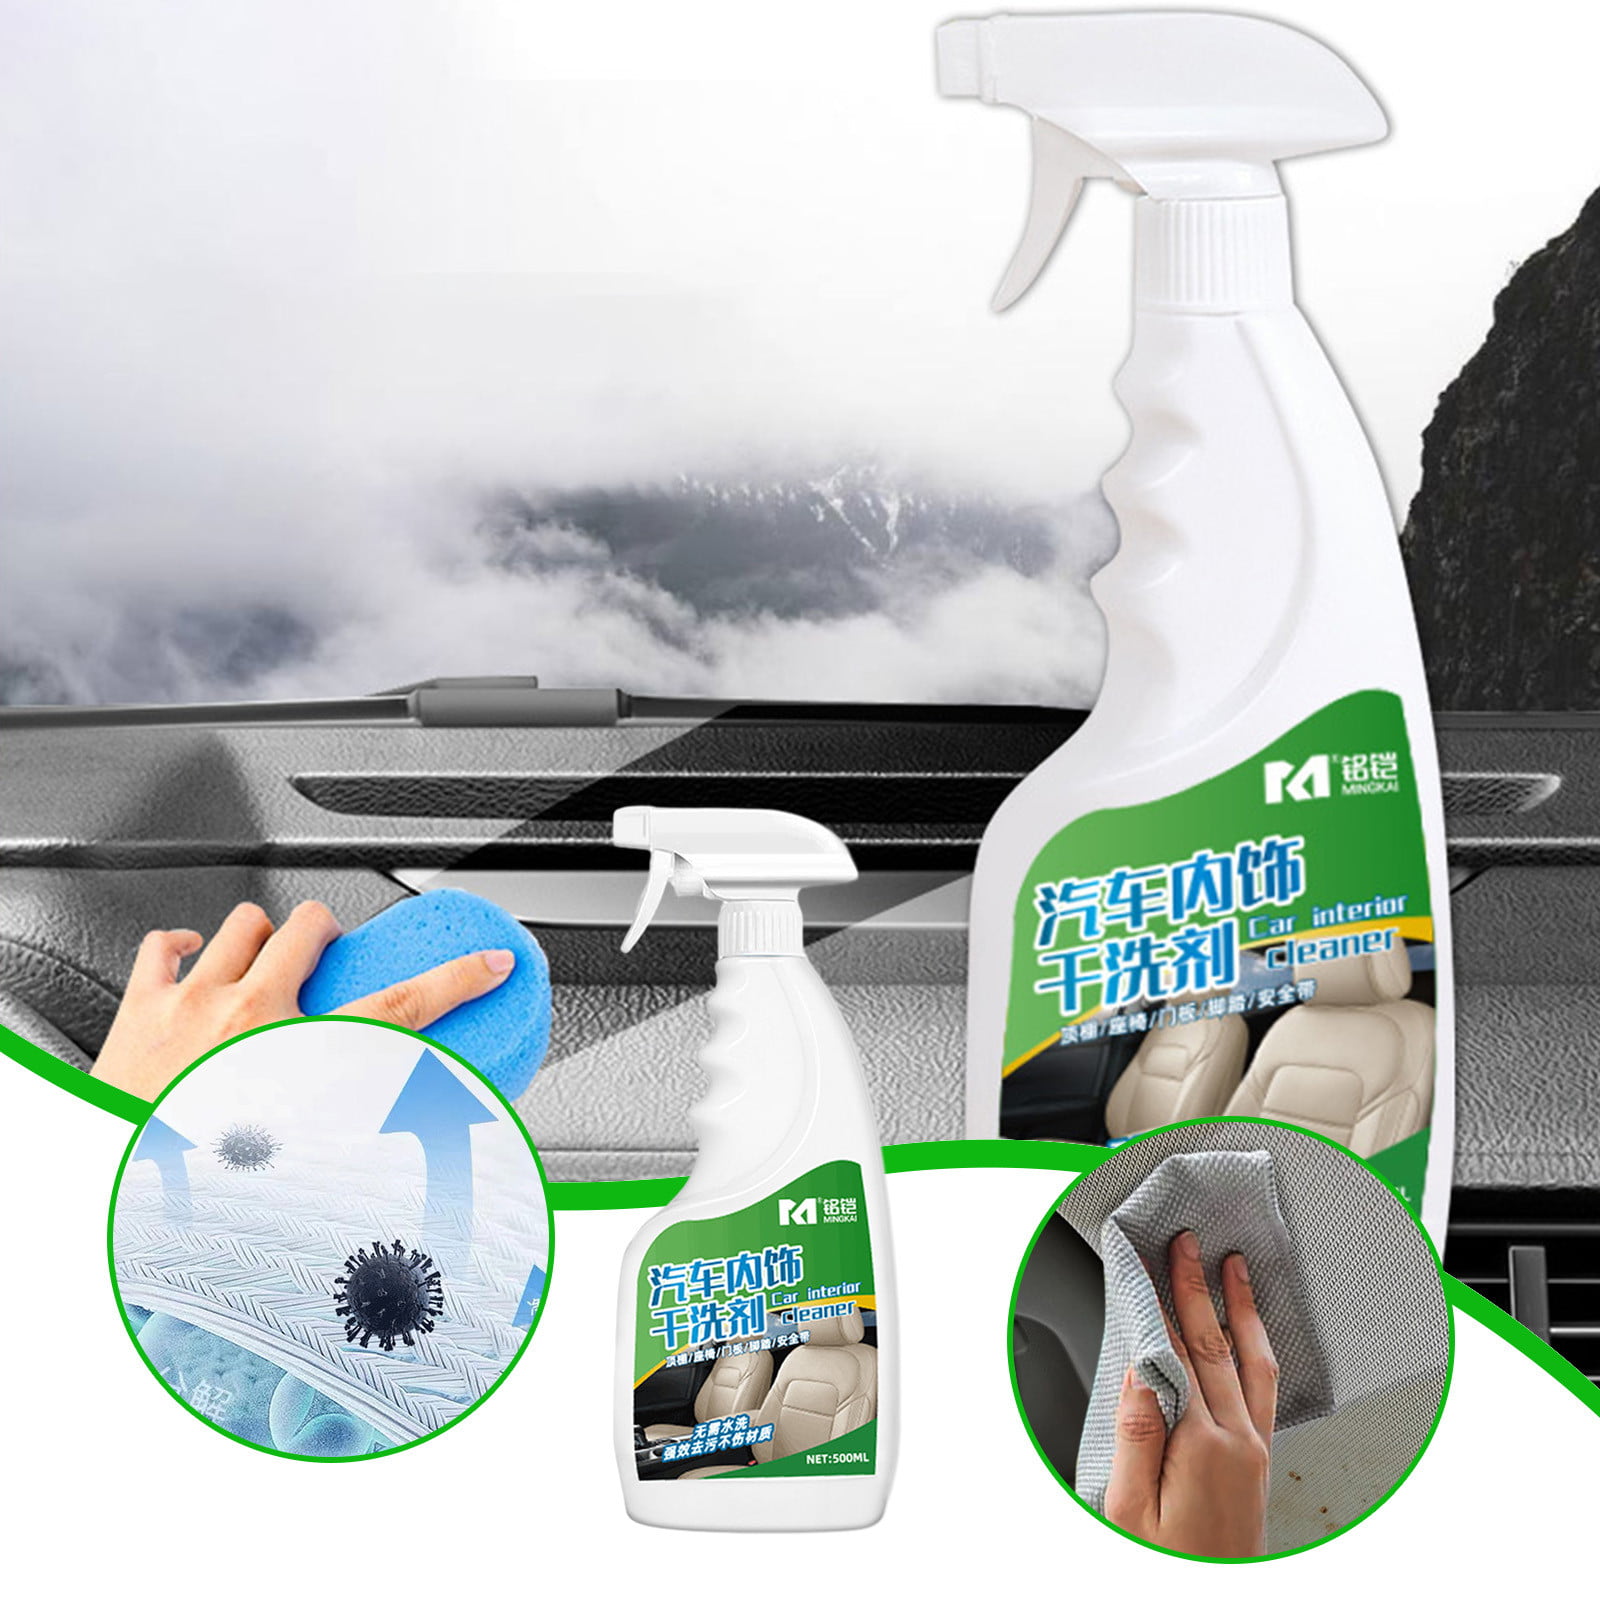 Enzyme 5 Seconds Car Stain Remover, Foam Cleaner for Car, 100ml Enzyme 5  Seconds Car Stain Remover, Car Stain Remover Interior, Spray Foam Cleaner,  Car Seat Upholstery Strong Stain Remover (100ML-2PC)